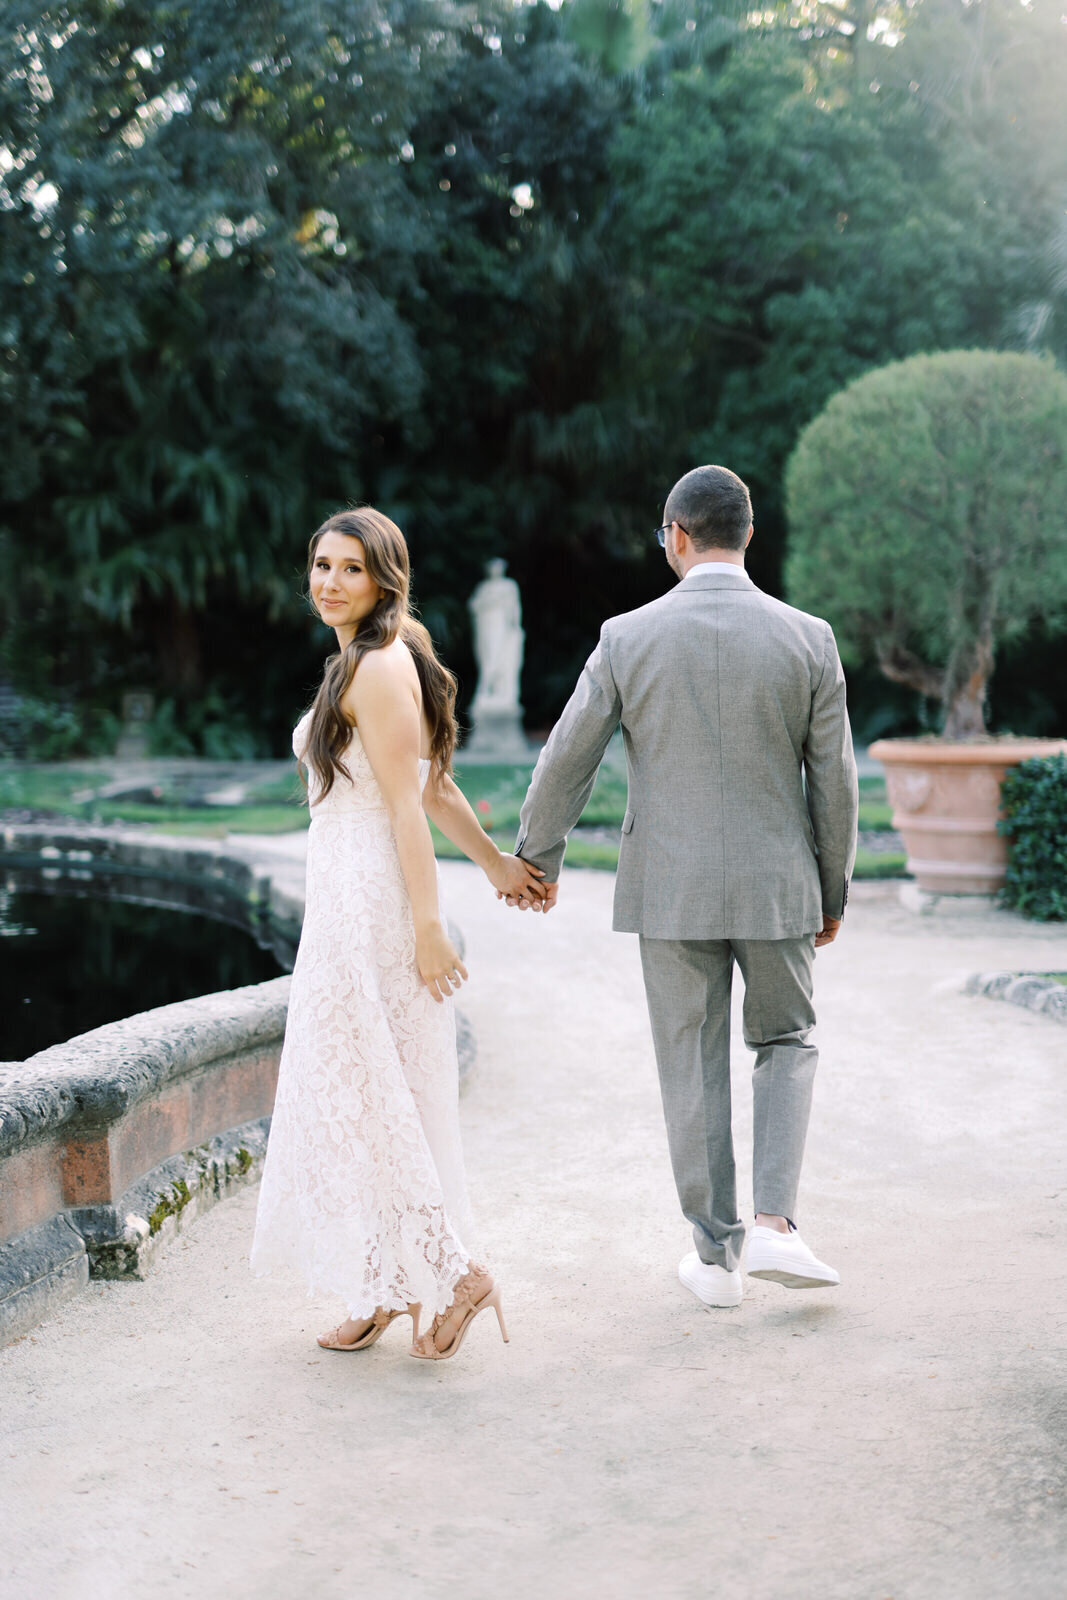 A Stylish and Chic Engagement Session at Vizcaya Museum in Miami Florida 7